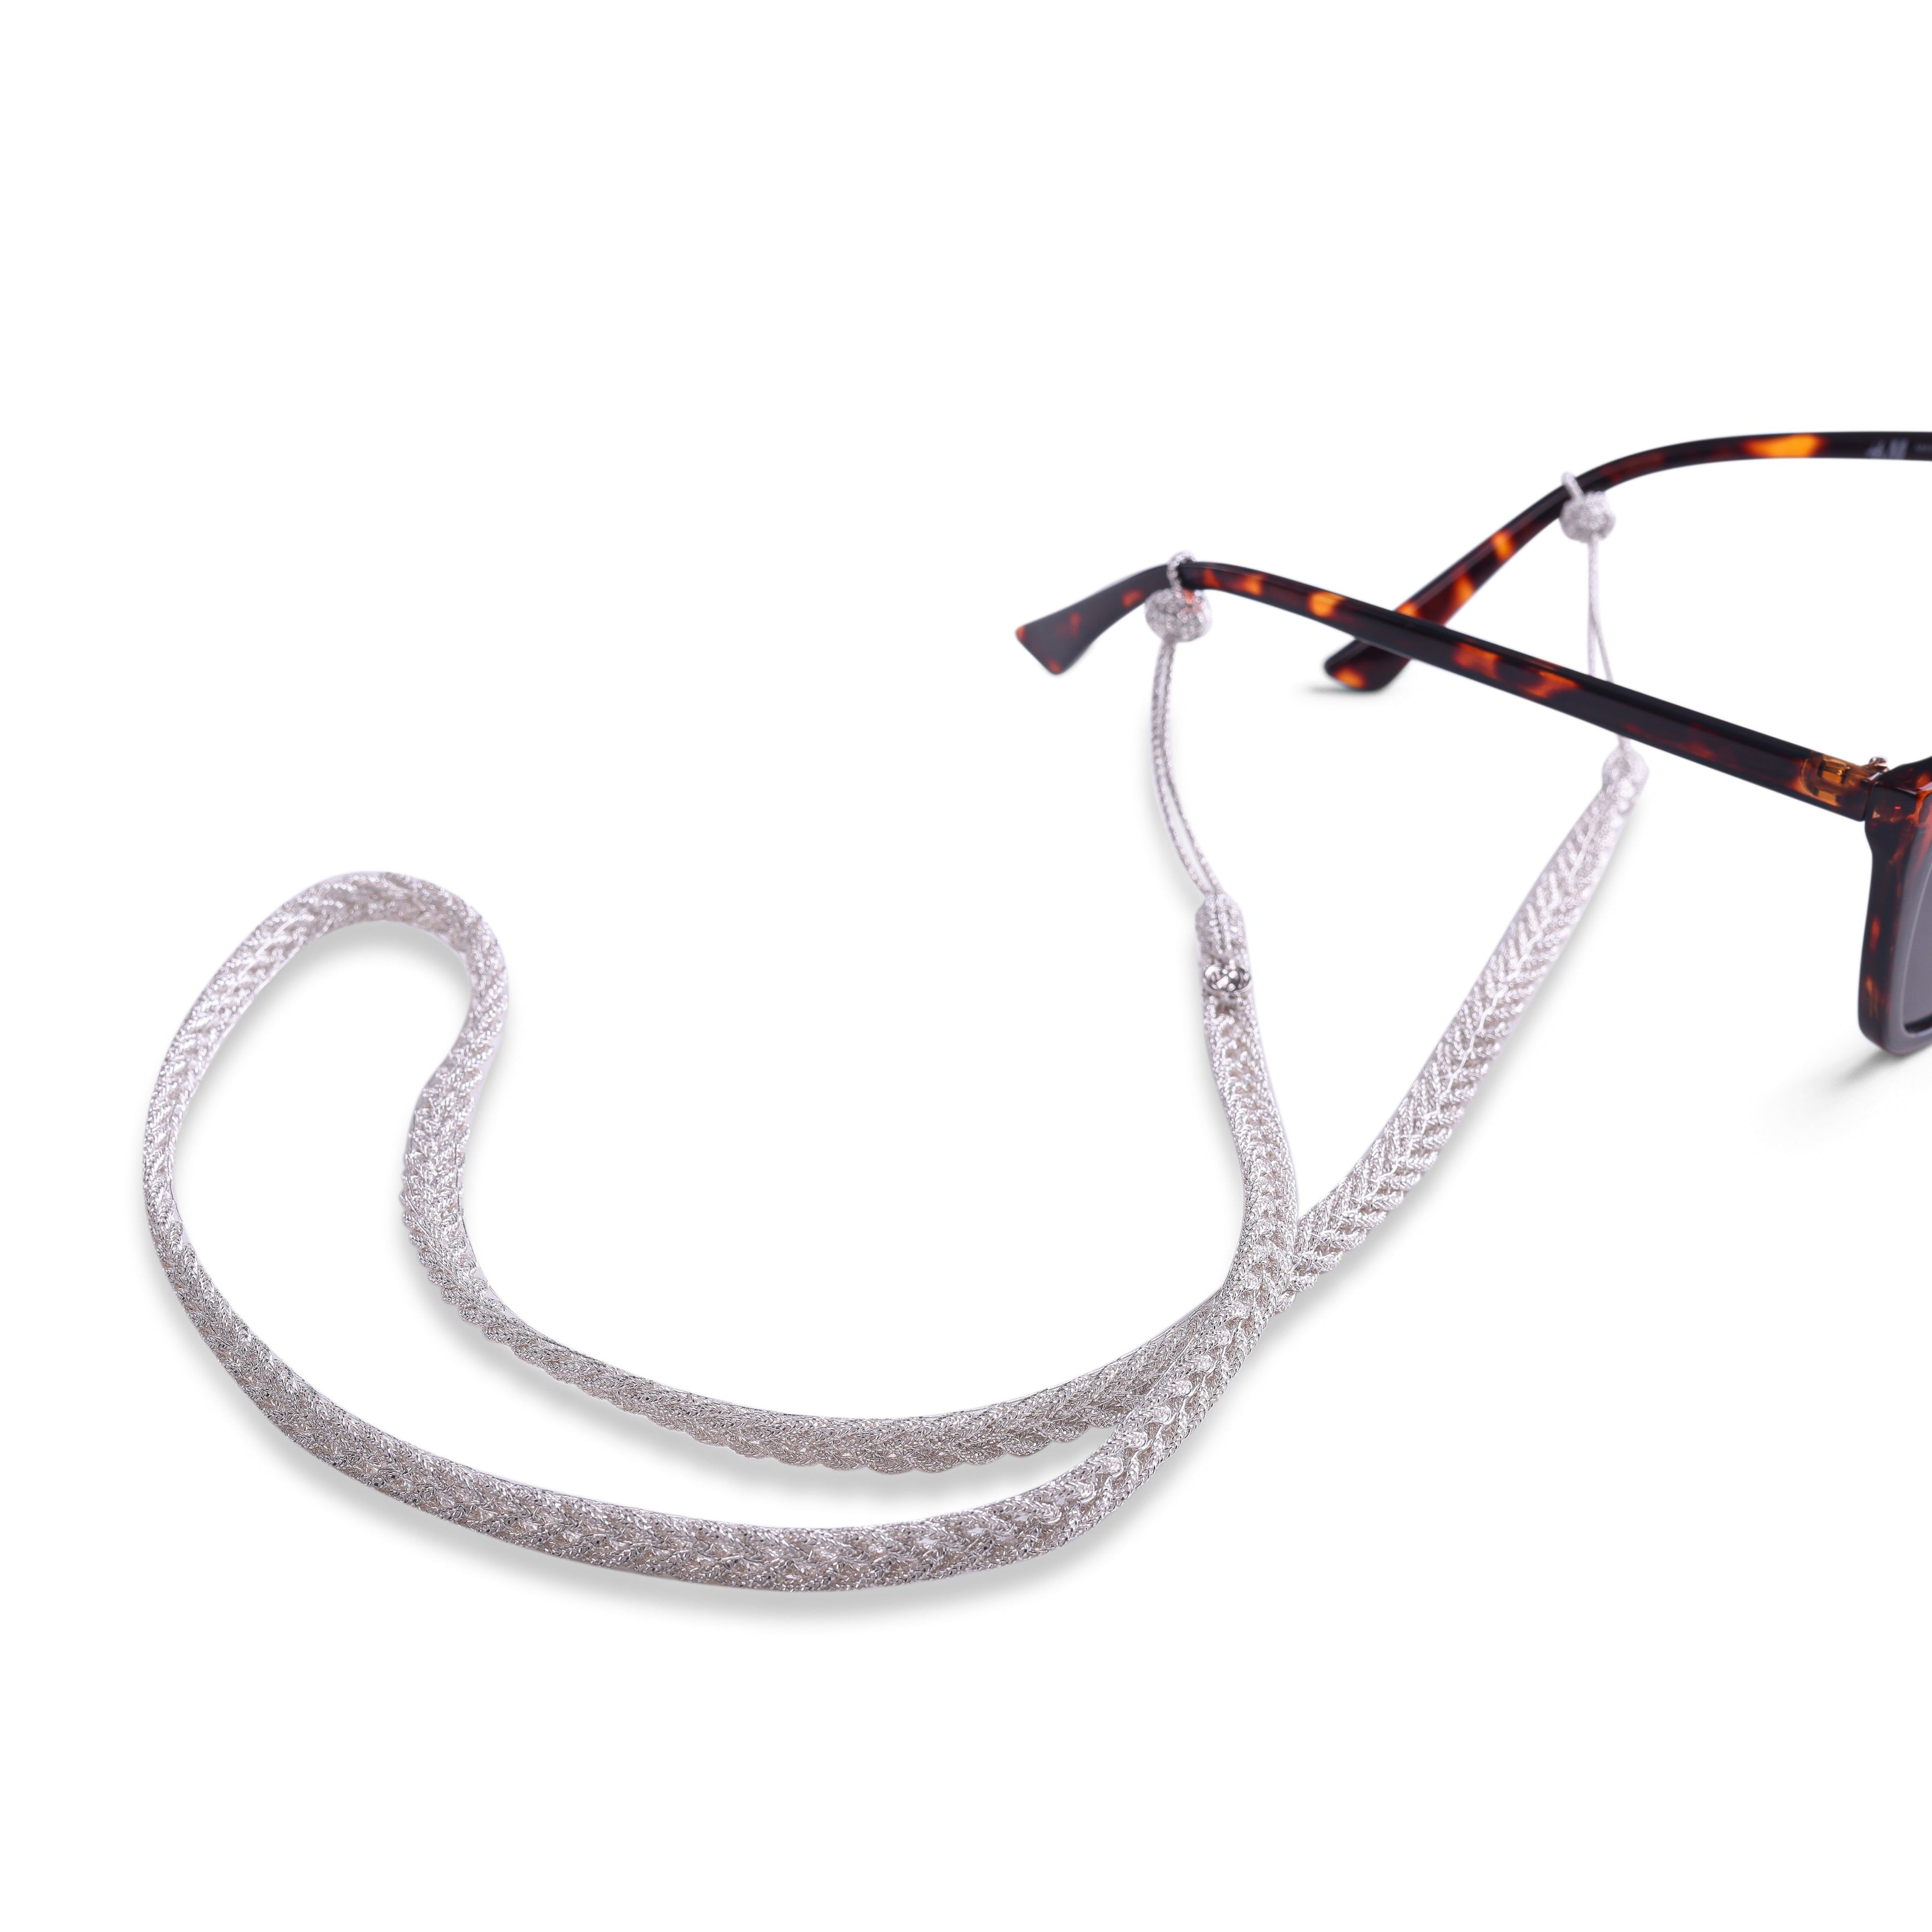 Braided Glasses Strap in Silver